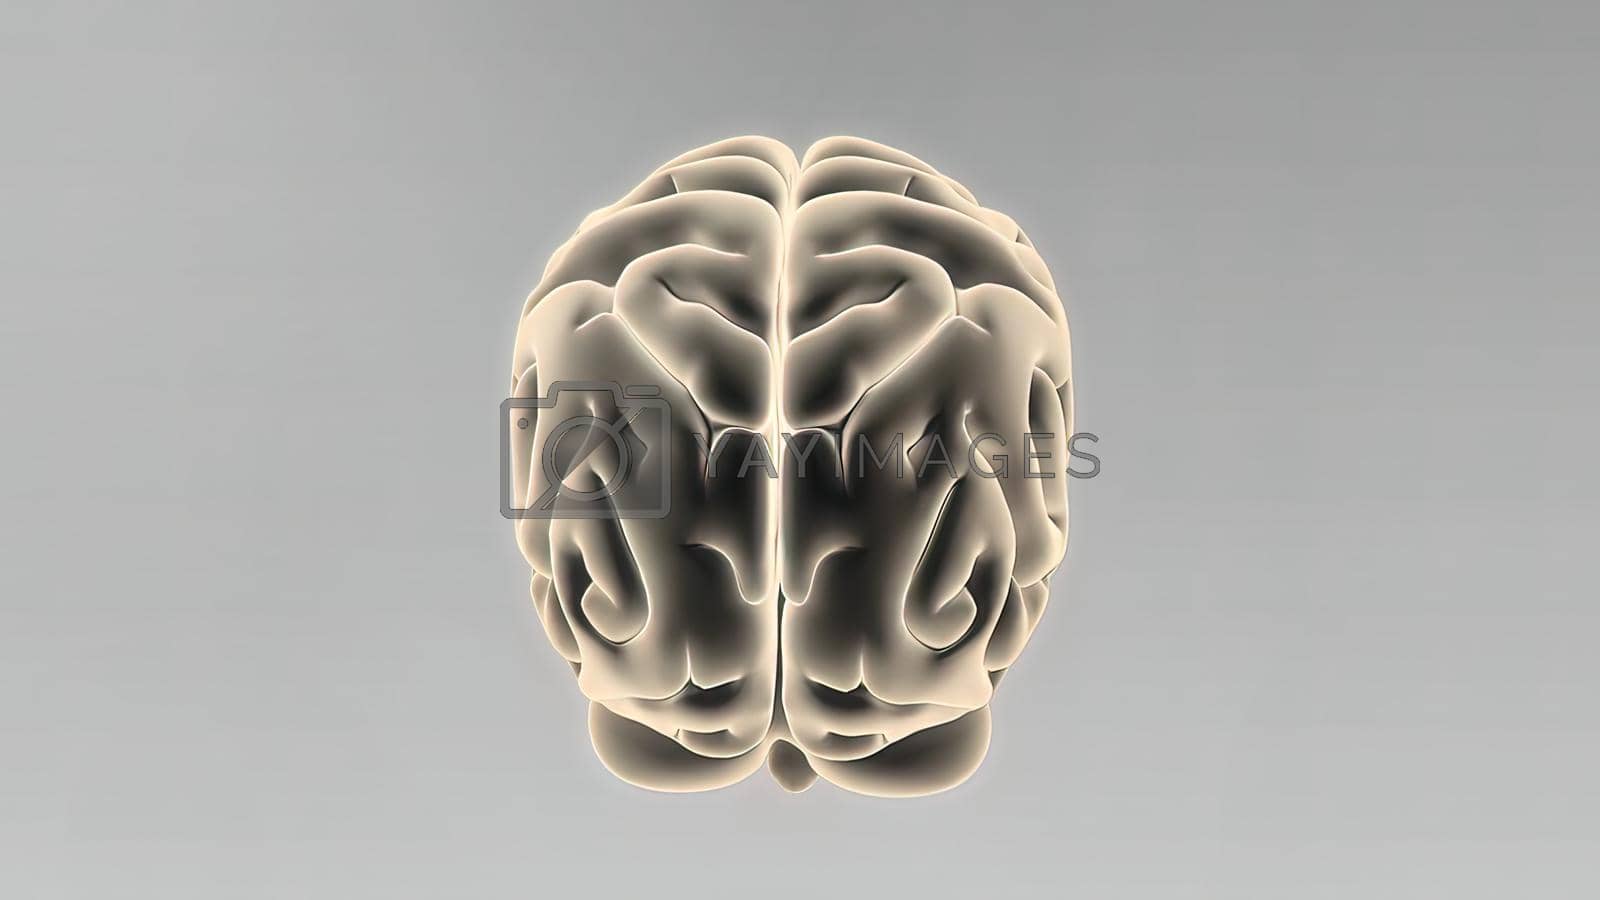 Royalty free image of Medical 3D illustration of human brain by creativepic